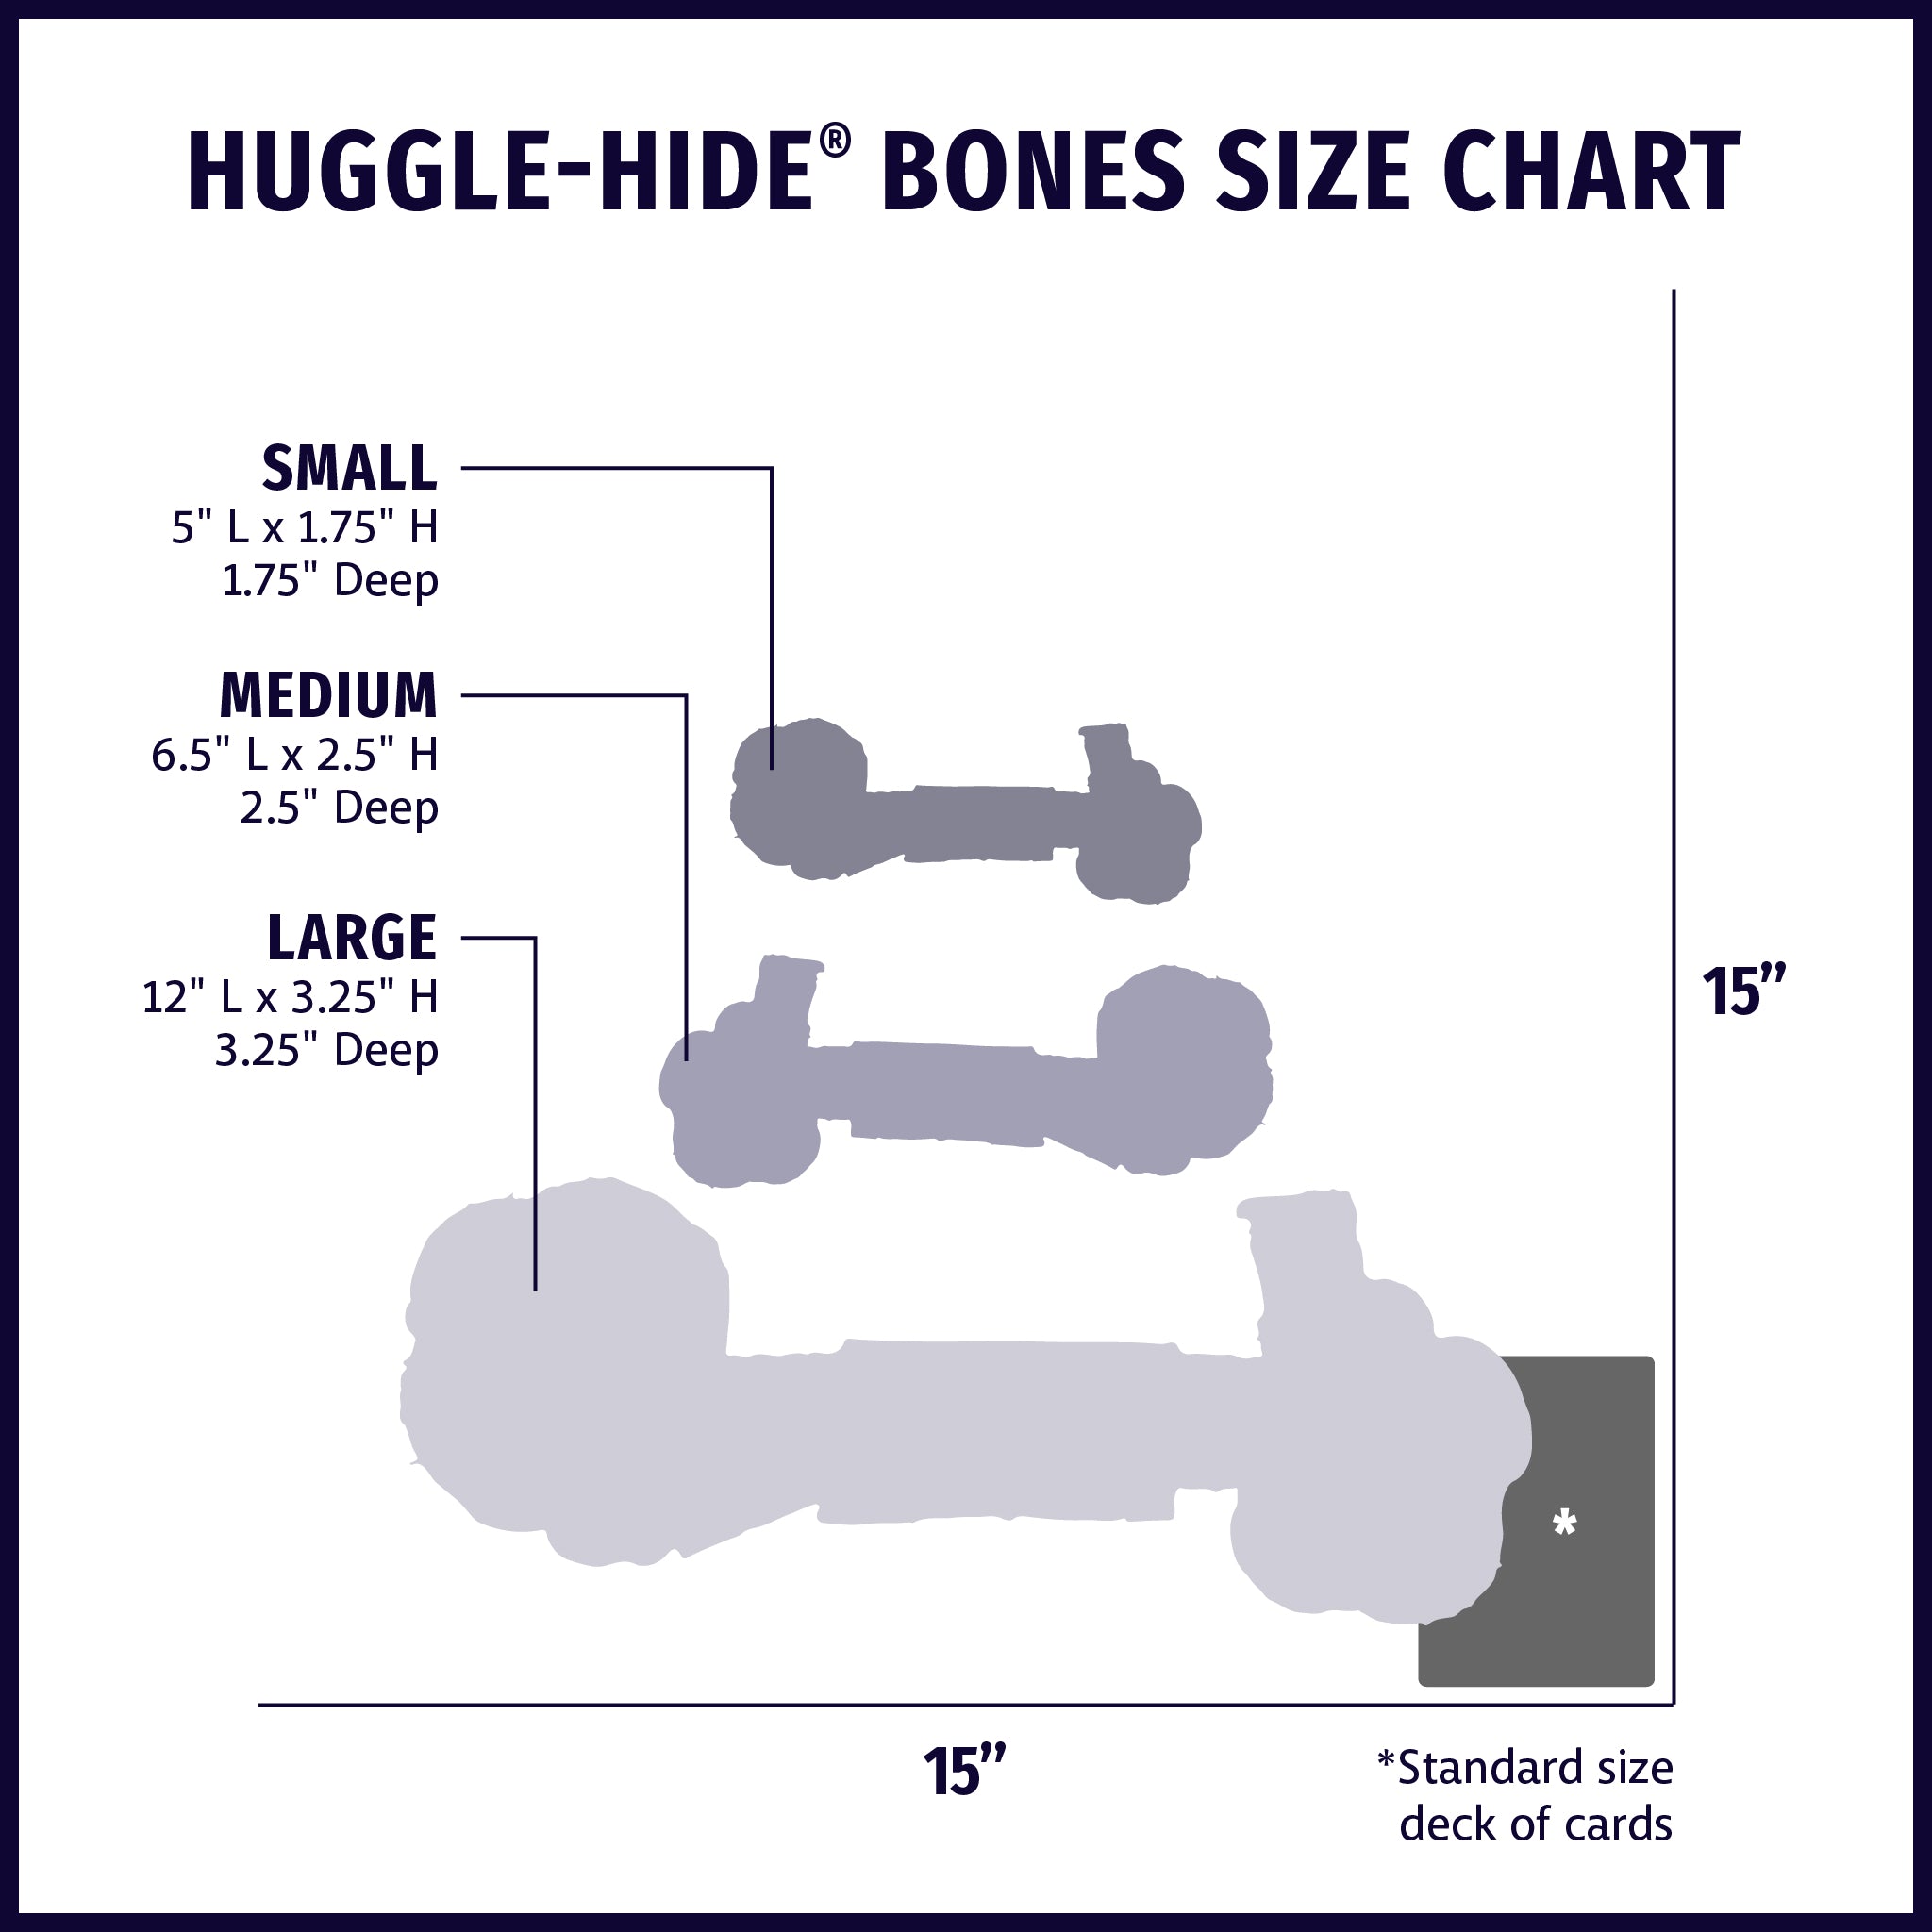 Size chart displaying Natural Huggle-Hide® bone dog toy silhouettes in small, medium, and large with approximate dimensions of each size compared to standard size deck of cards.